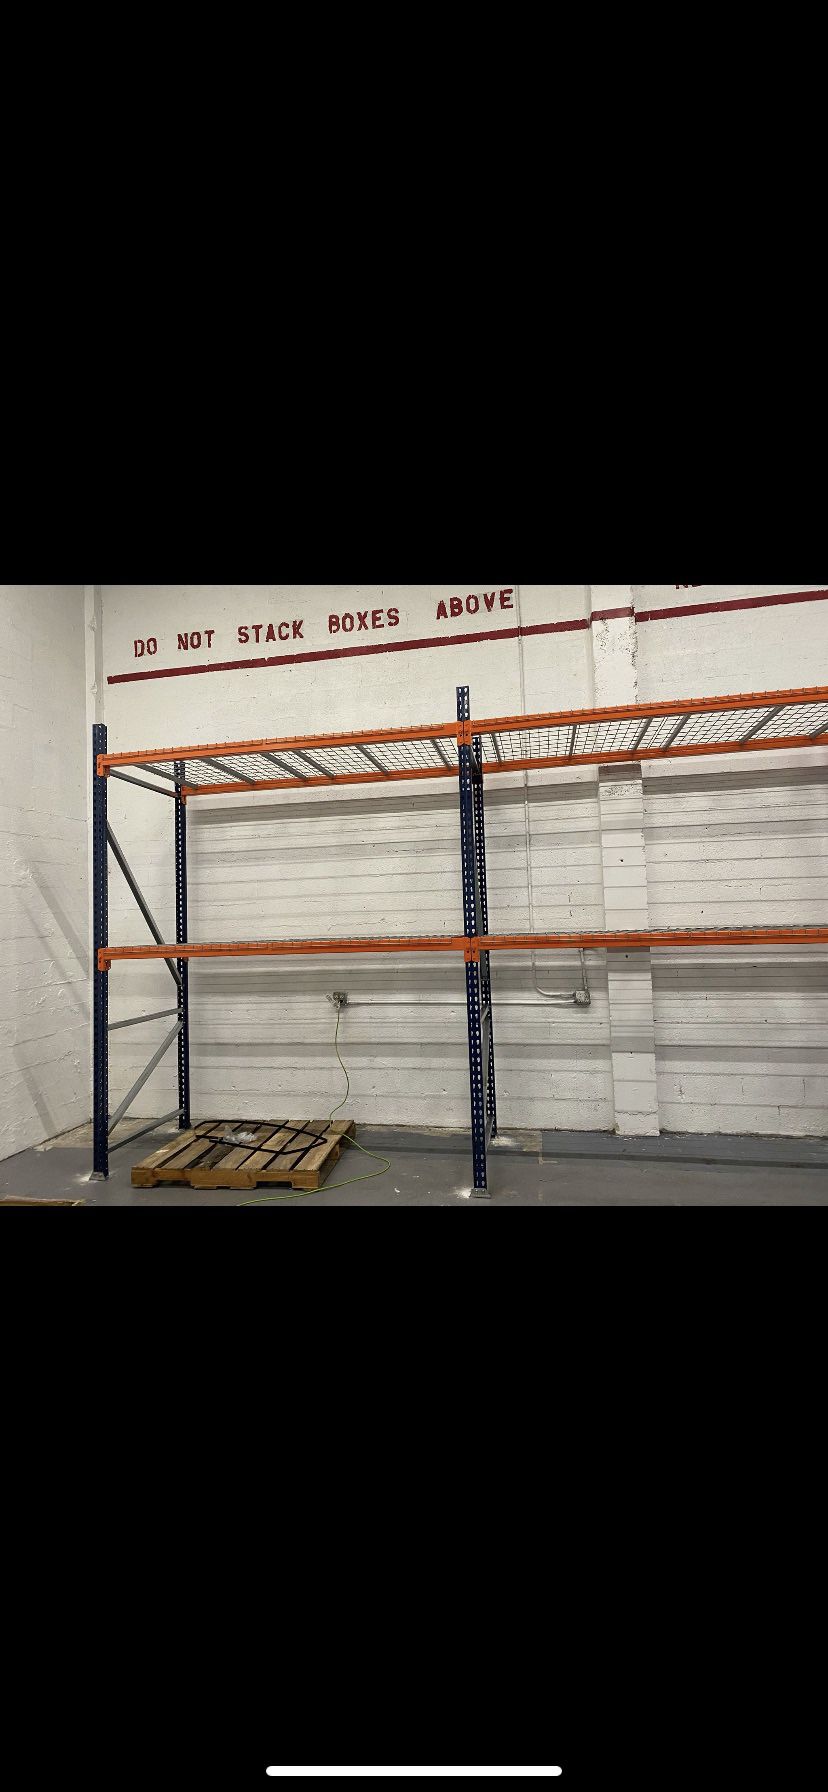 PALLET RACKS POSITION NEW AND USED CONDITION 